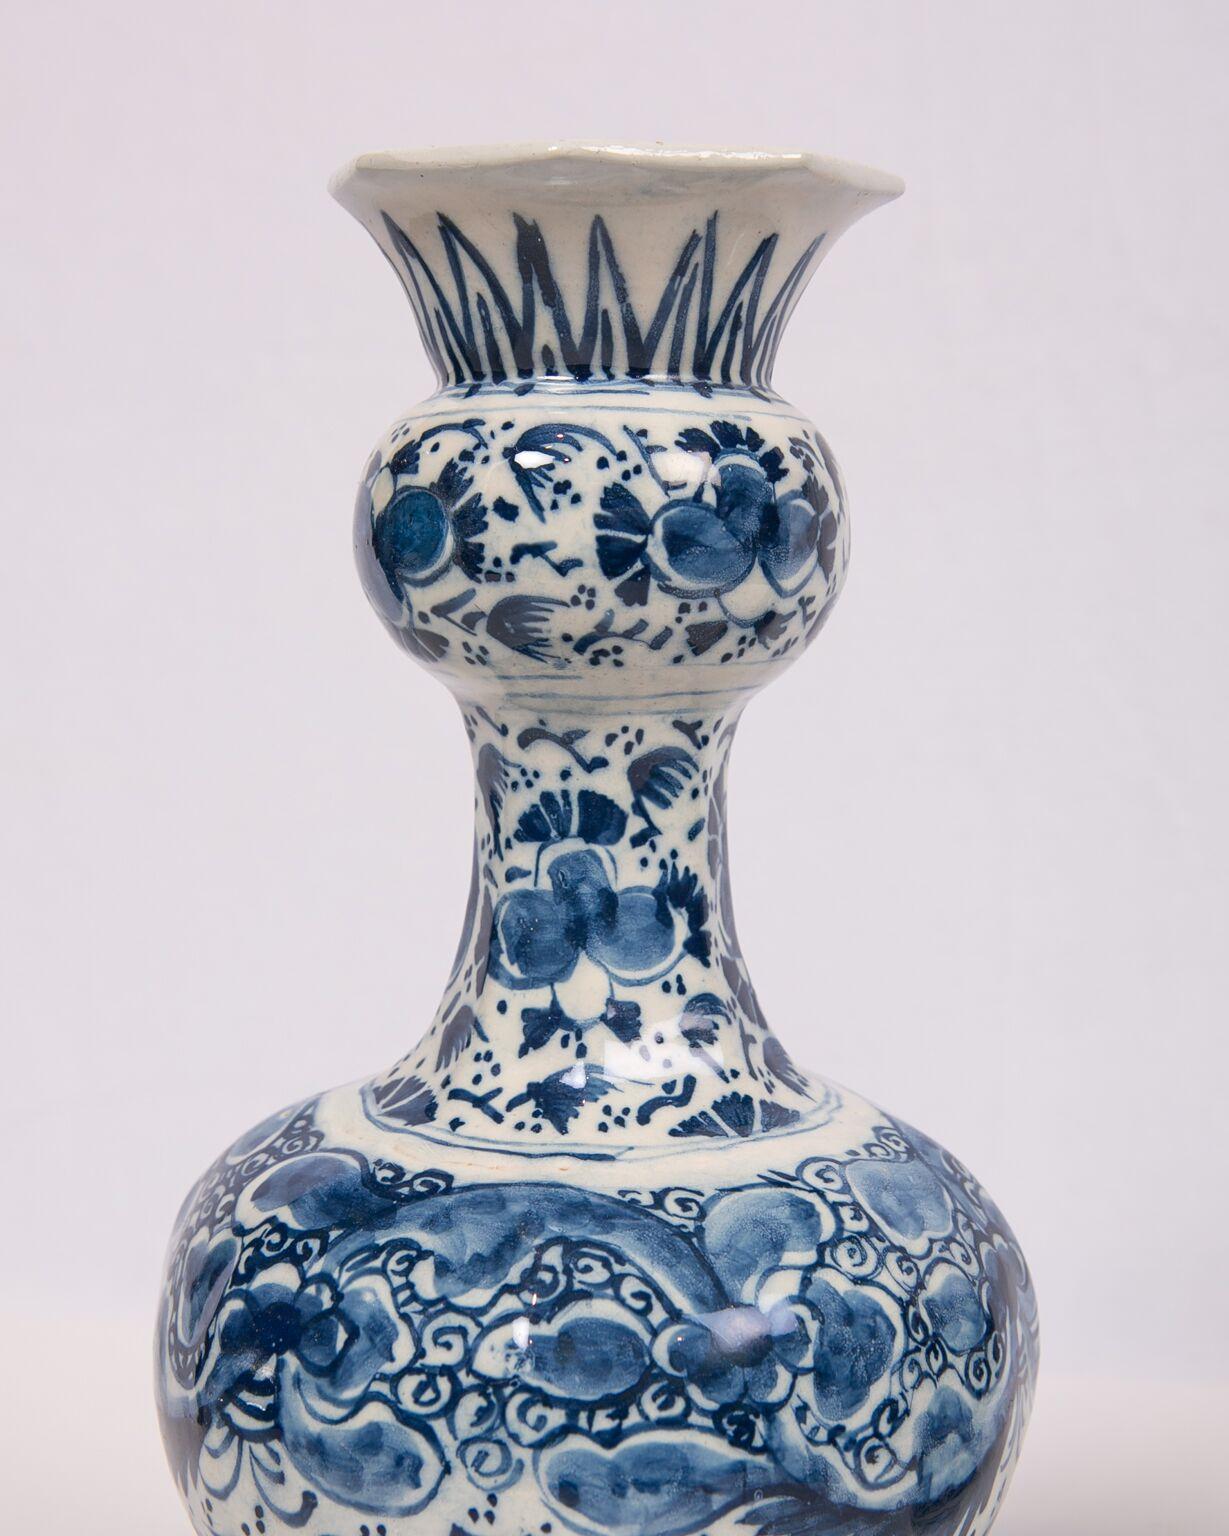 Hand-Painted Pair of Blue and White Delft Vases Showing Peacocks and Flowers, 18th Century